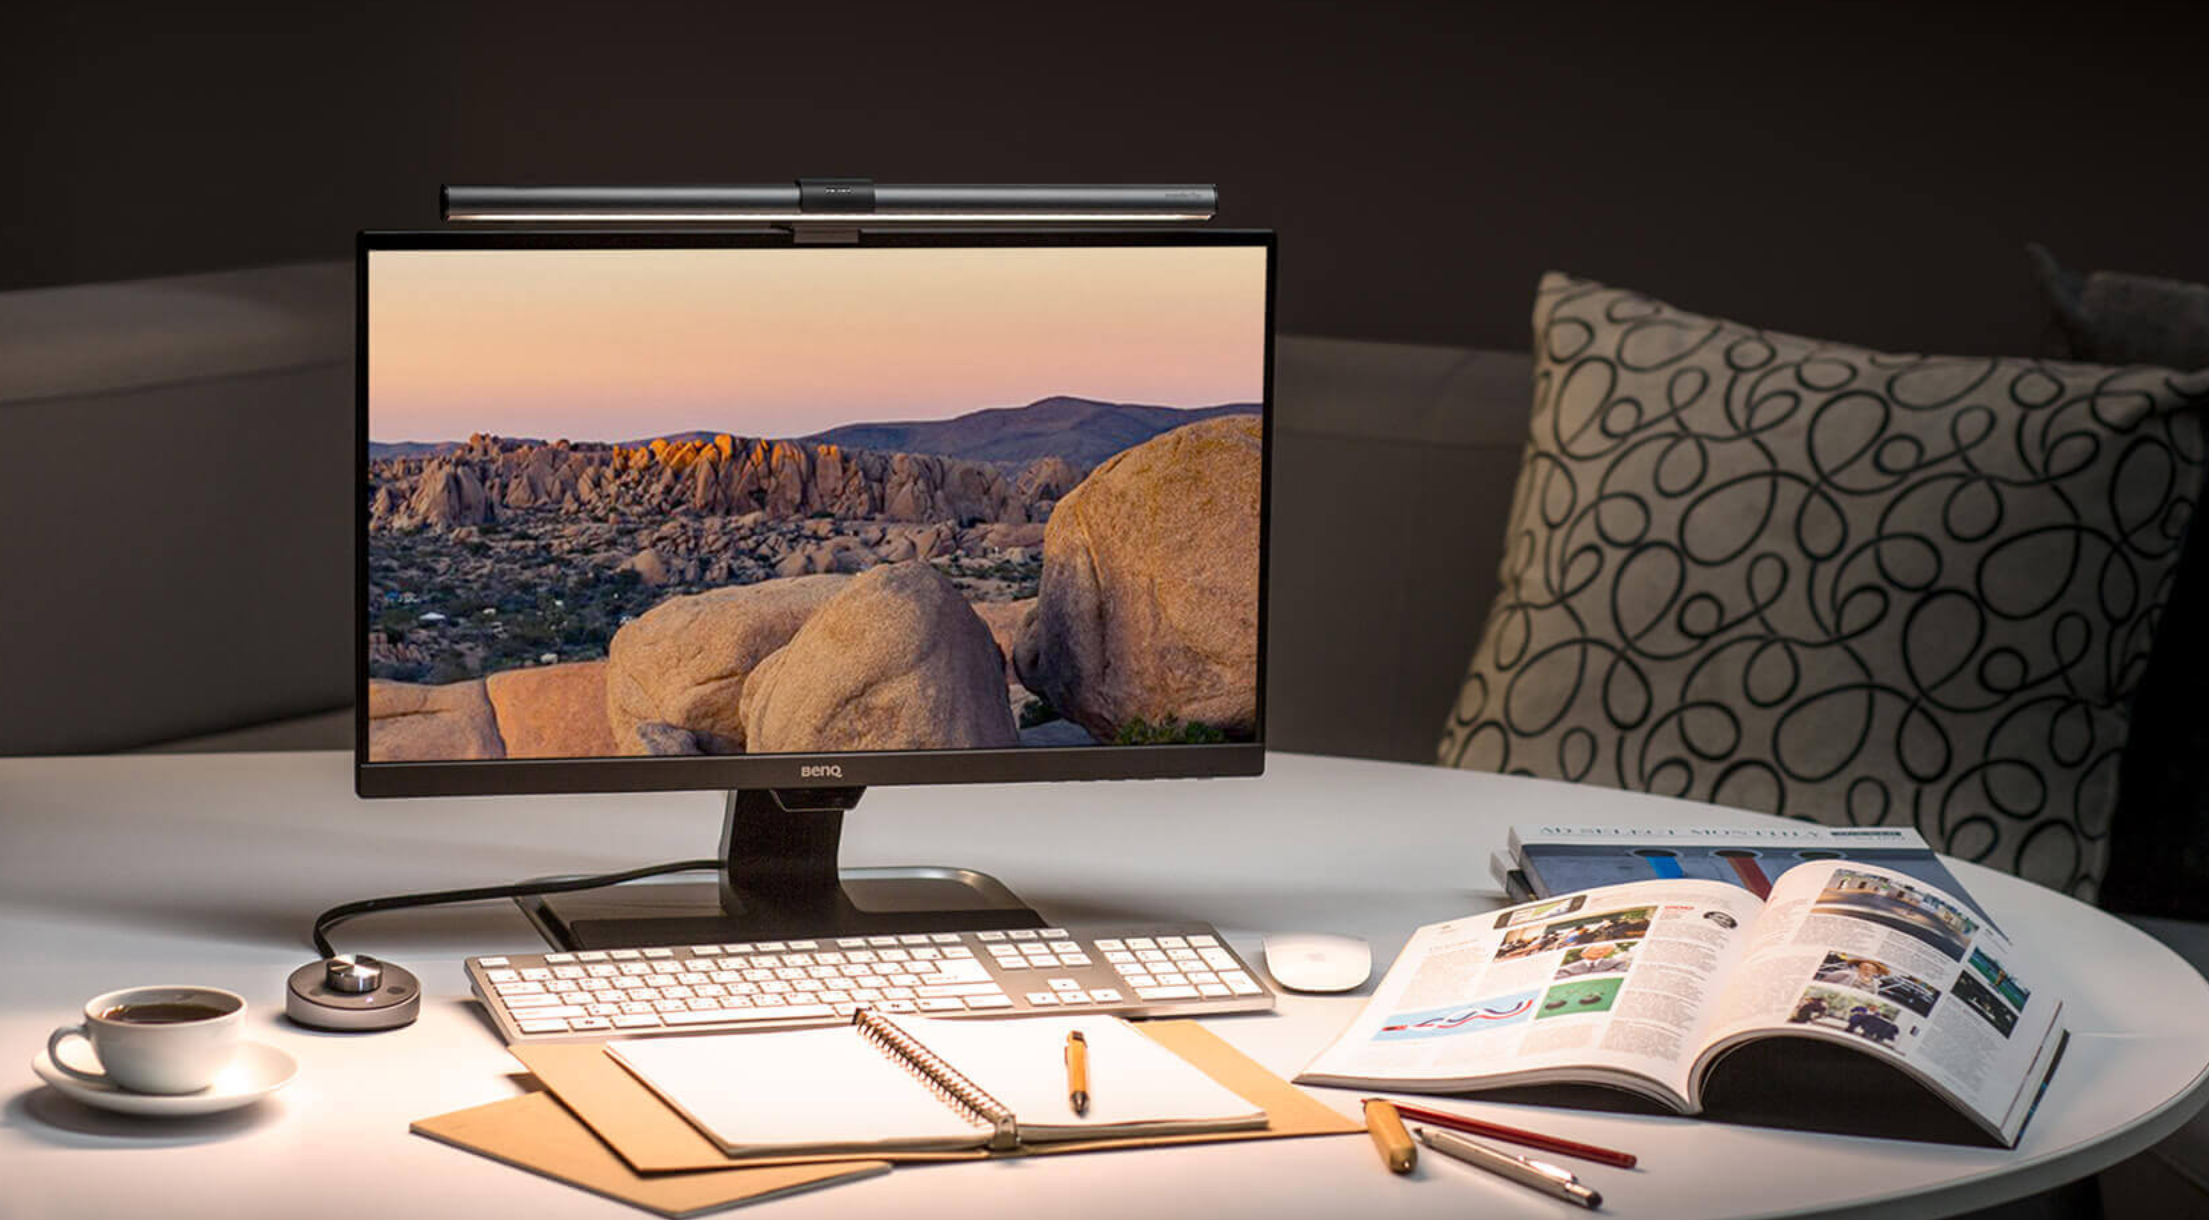 ScreenBar Plus Hands-On: Easy to and with plenty features, but cables galore - News